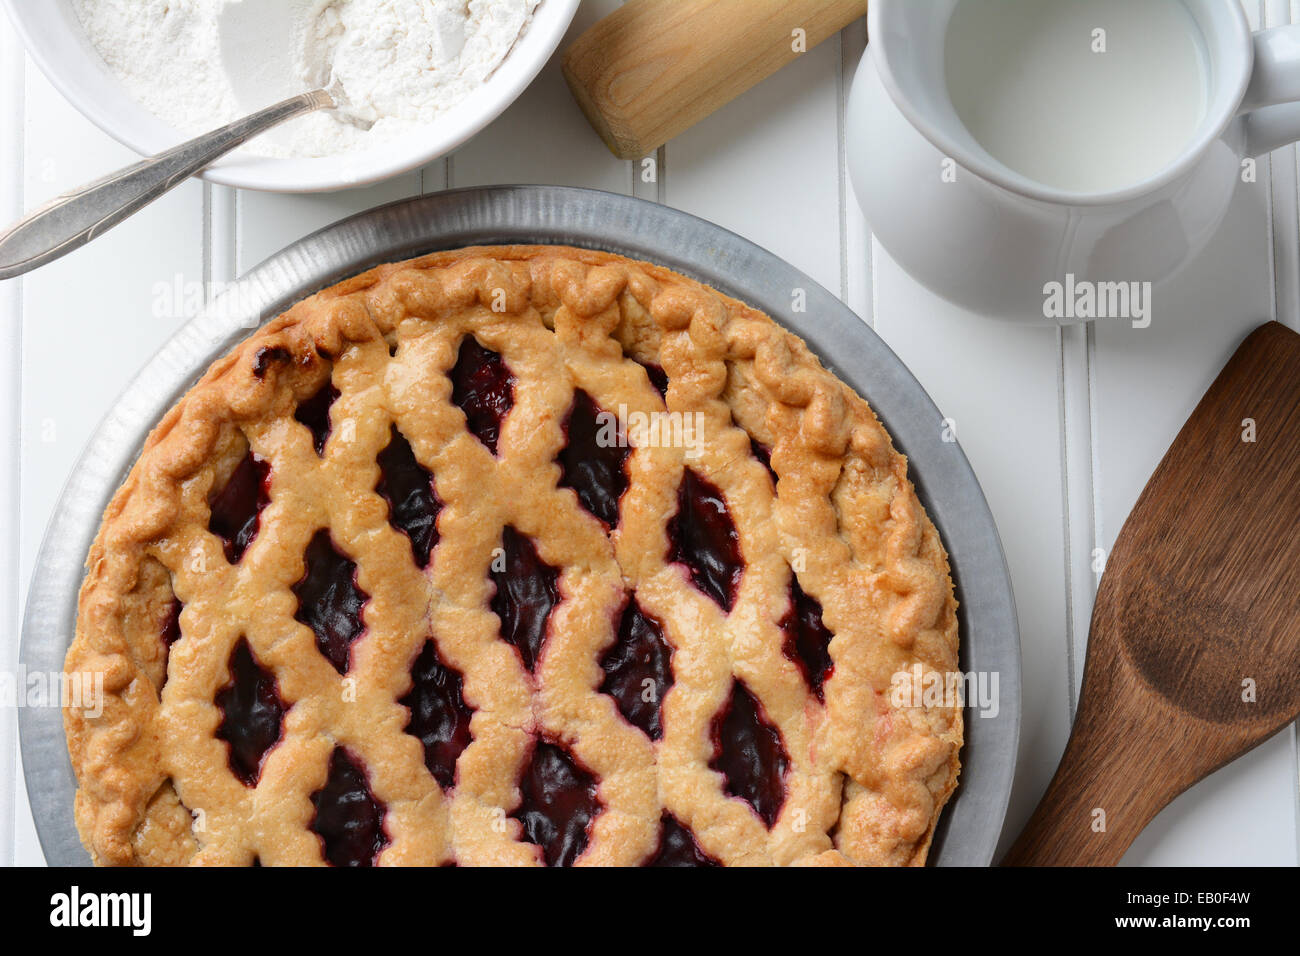 High angle shot of a fresh baked fruit pie with a lattice crust. the pie is surrounded by baking items. Horizontal format. Stock Photo